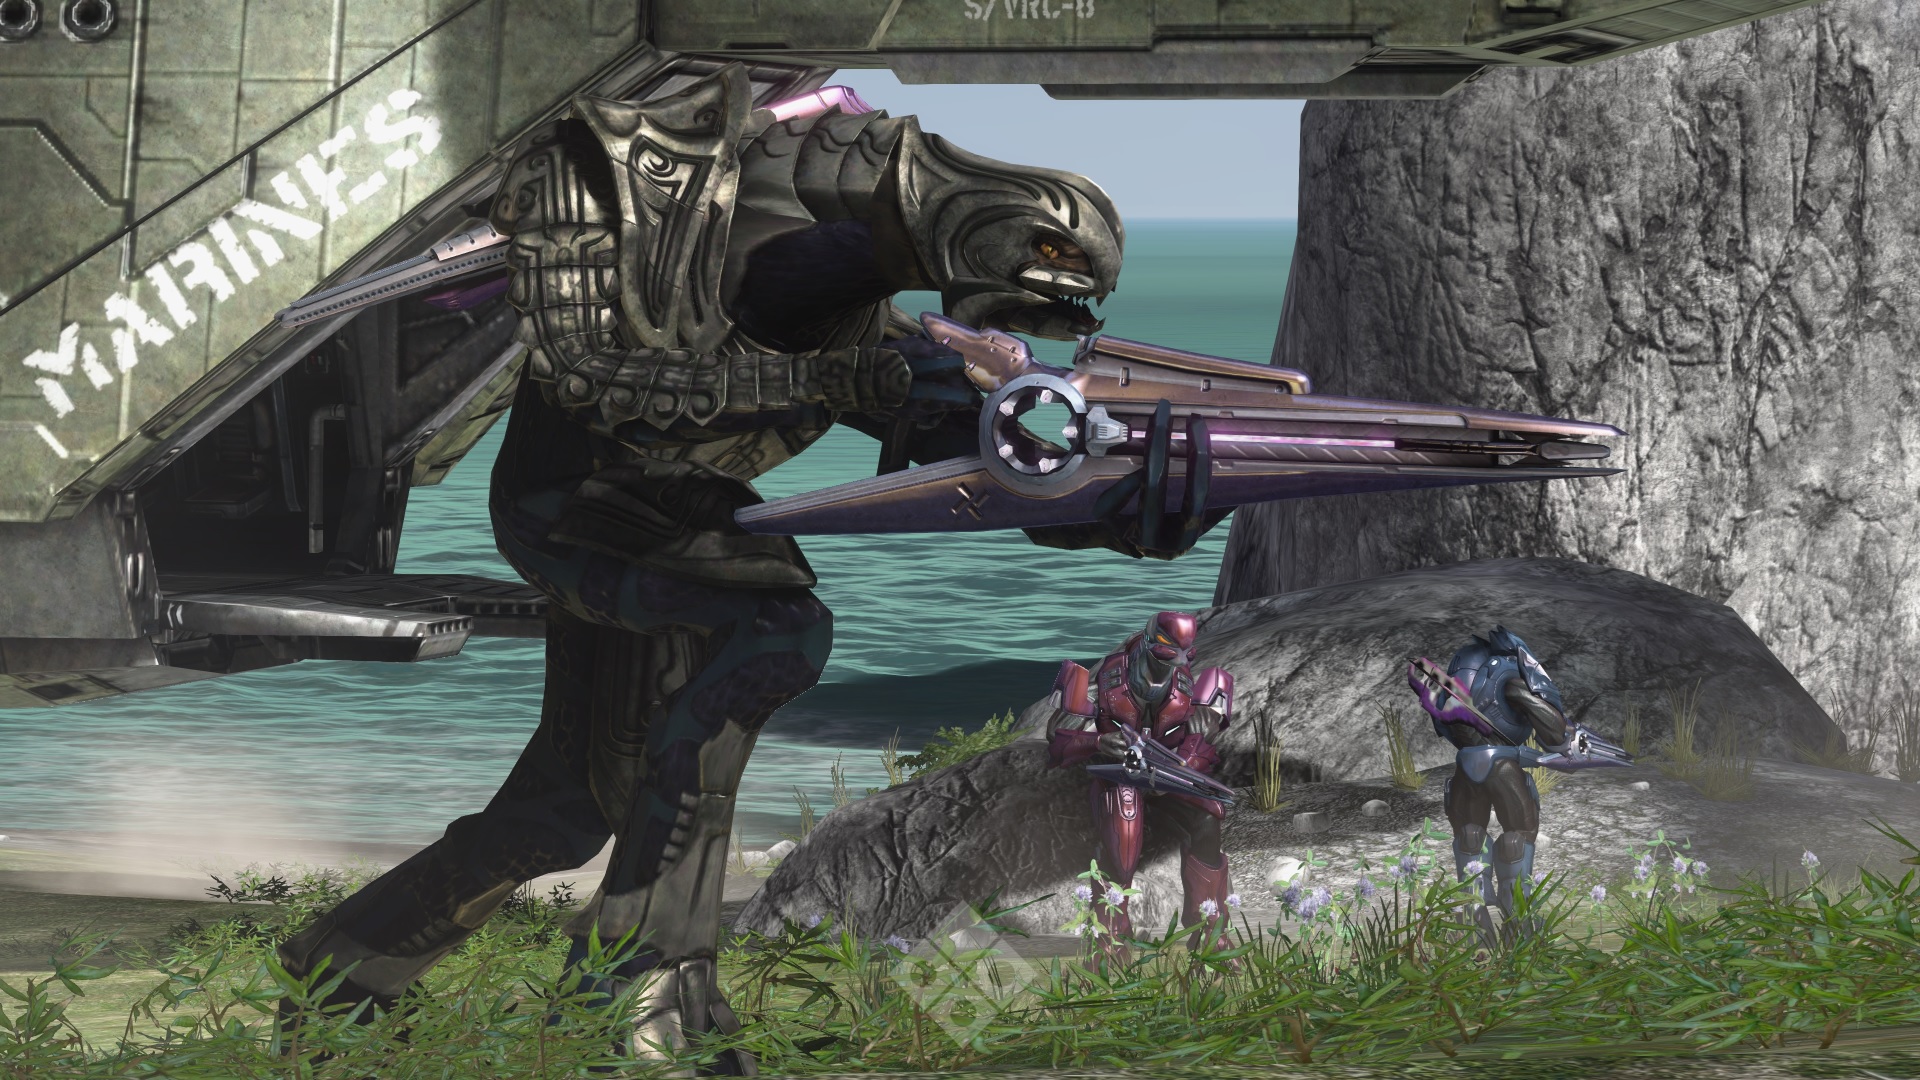 Halo 3 screenshot of Arbiter Thel 'Vadam, Usze 'Taham, and N'tho 'Sraom exiting Pelicans at the start of the mission The Covenant